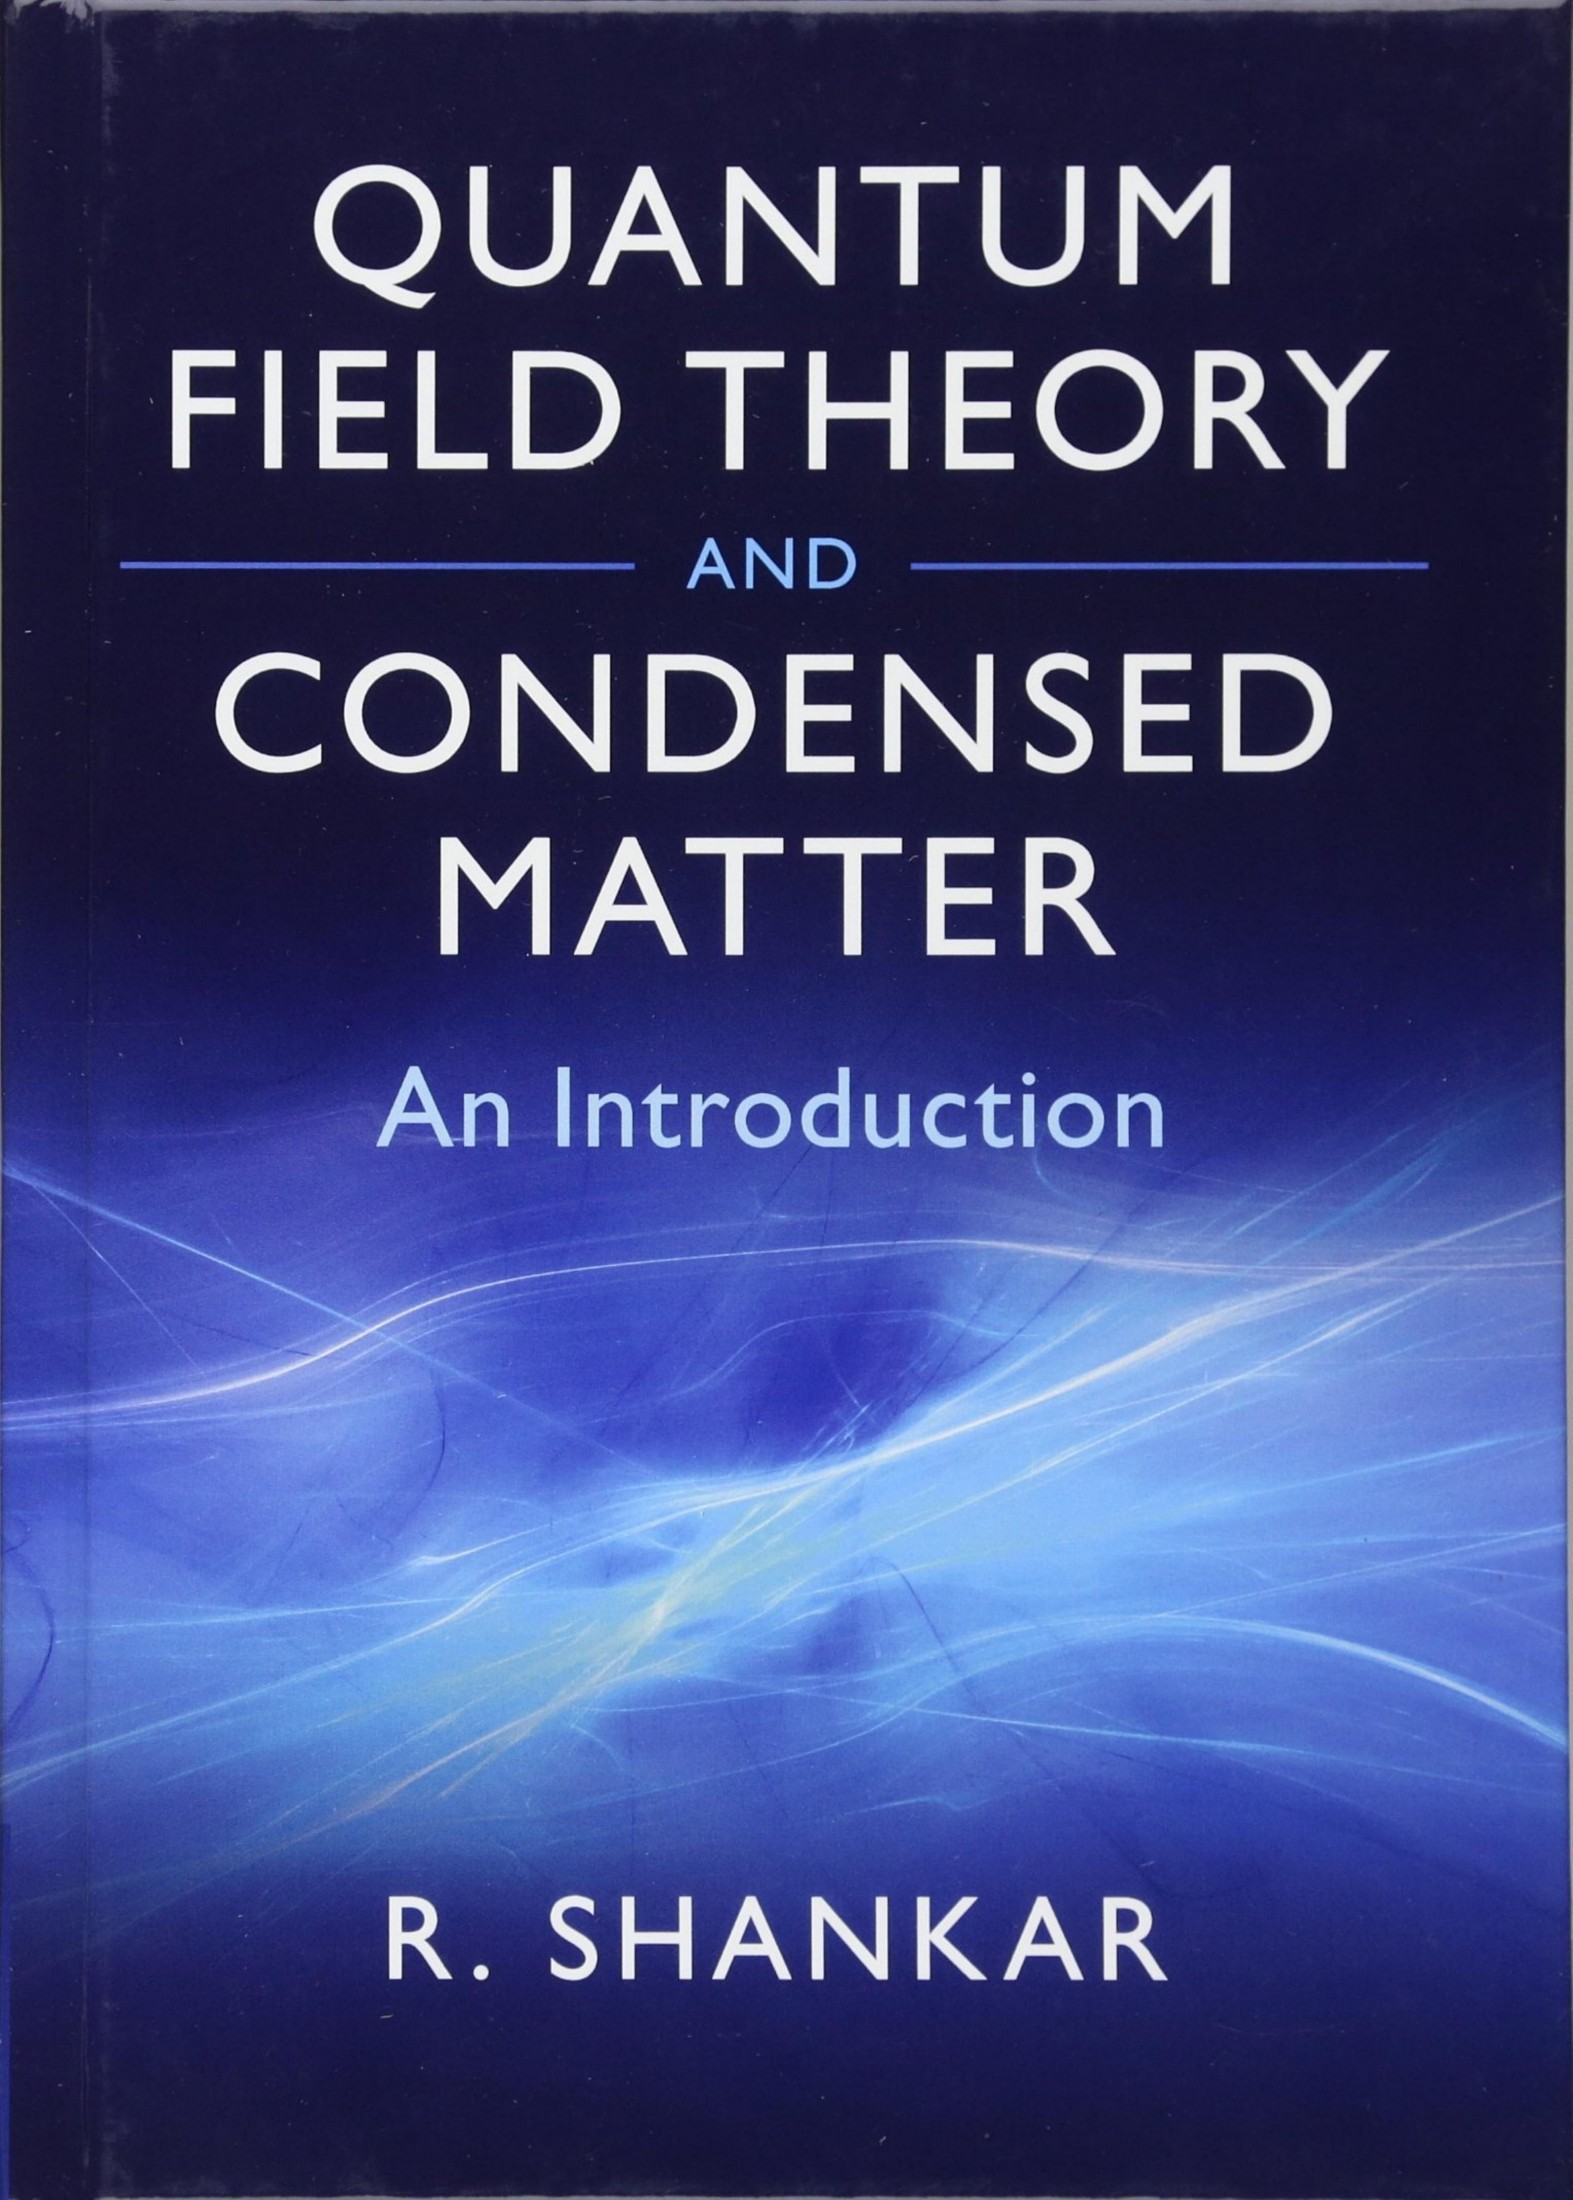 Quantum Field Theory and Condensed Matter An Introduction 2017